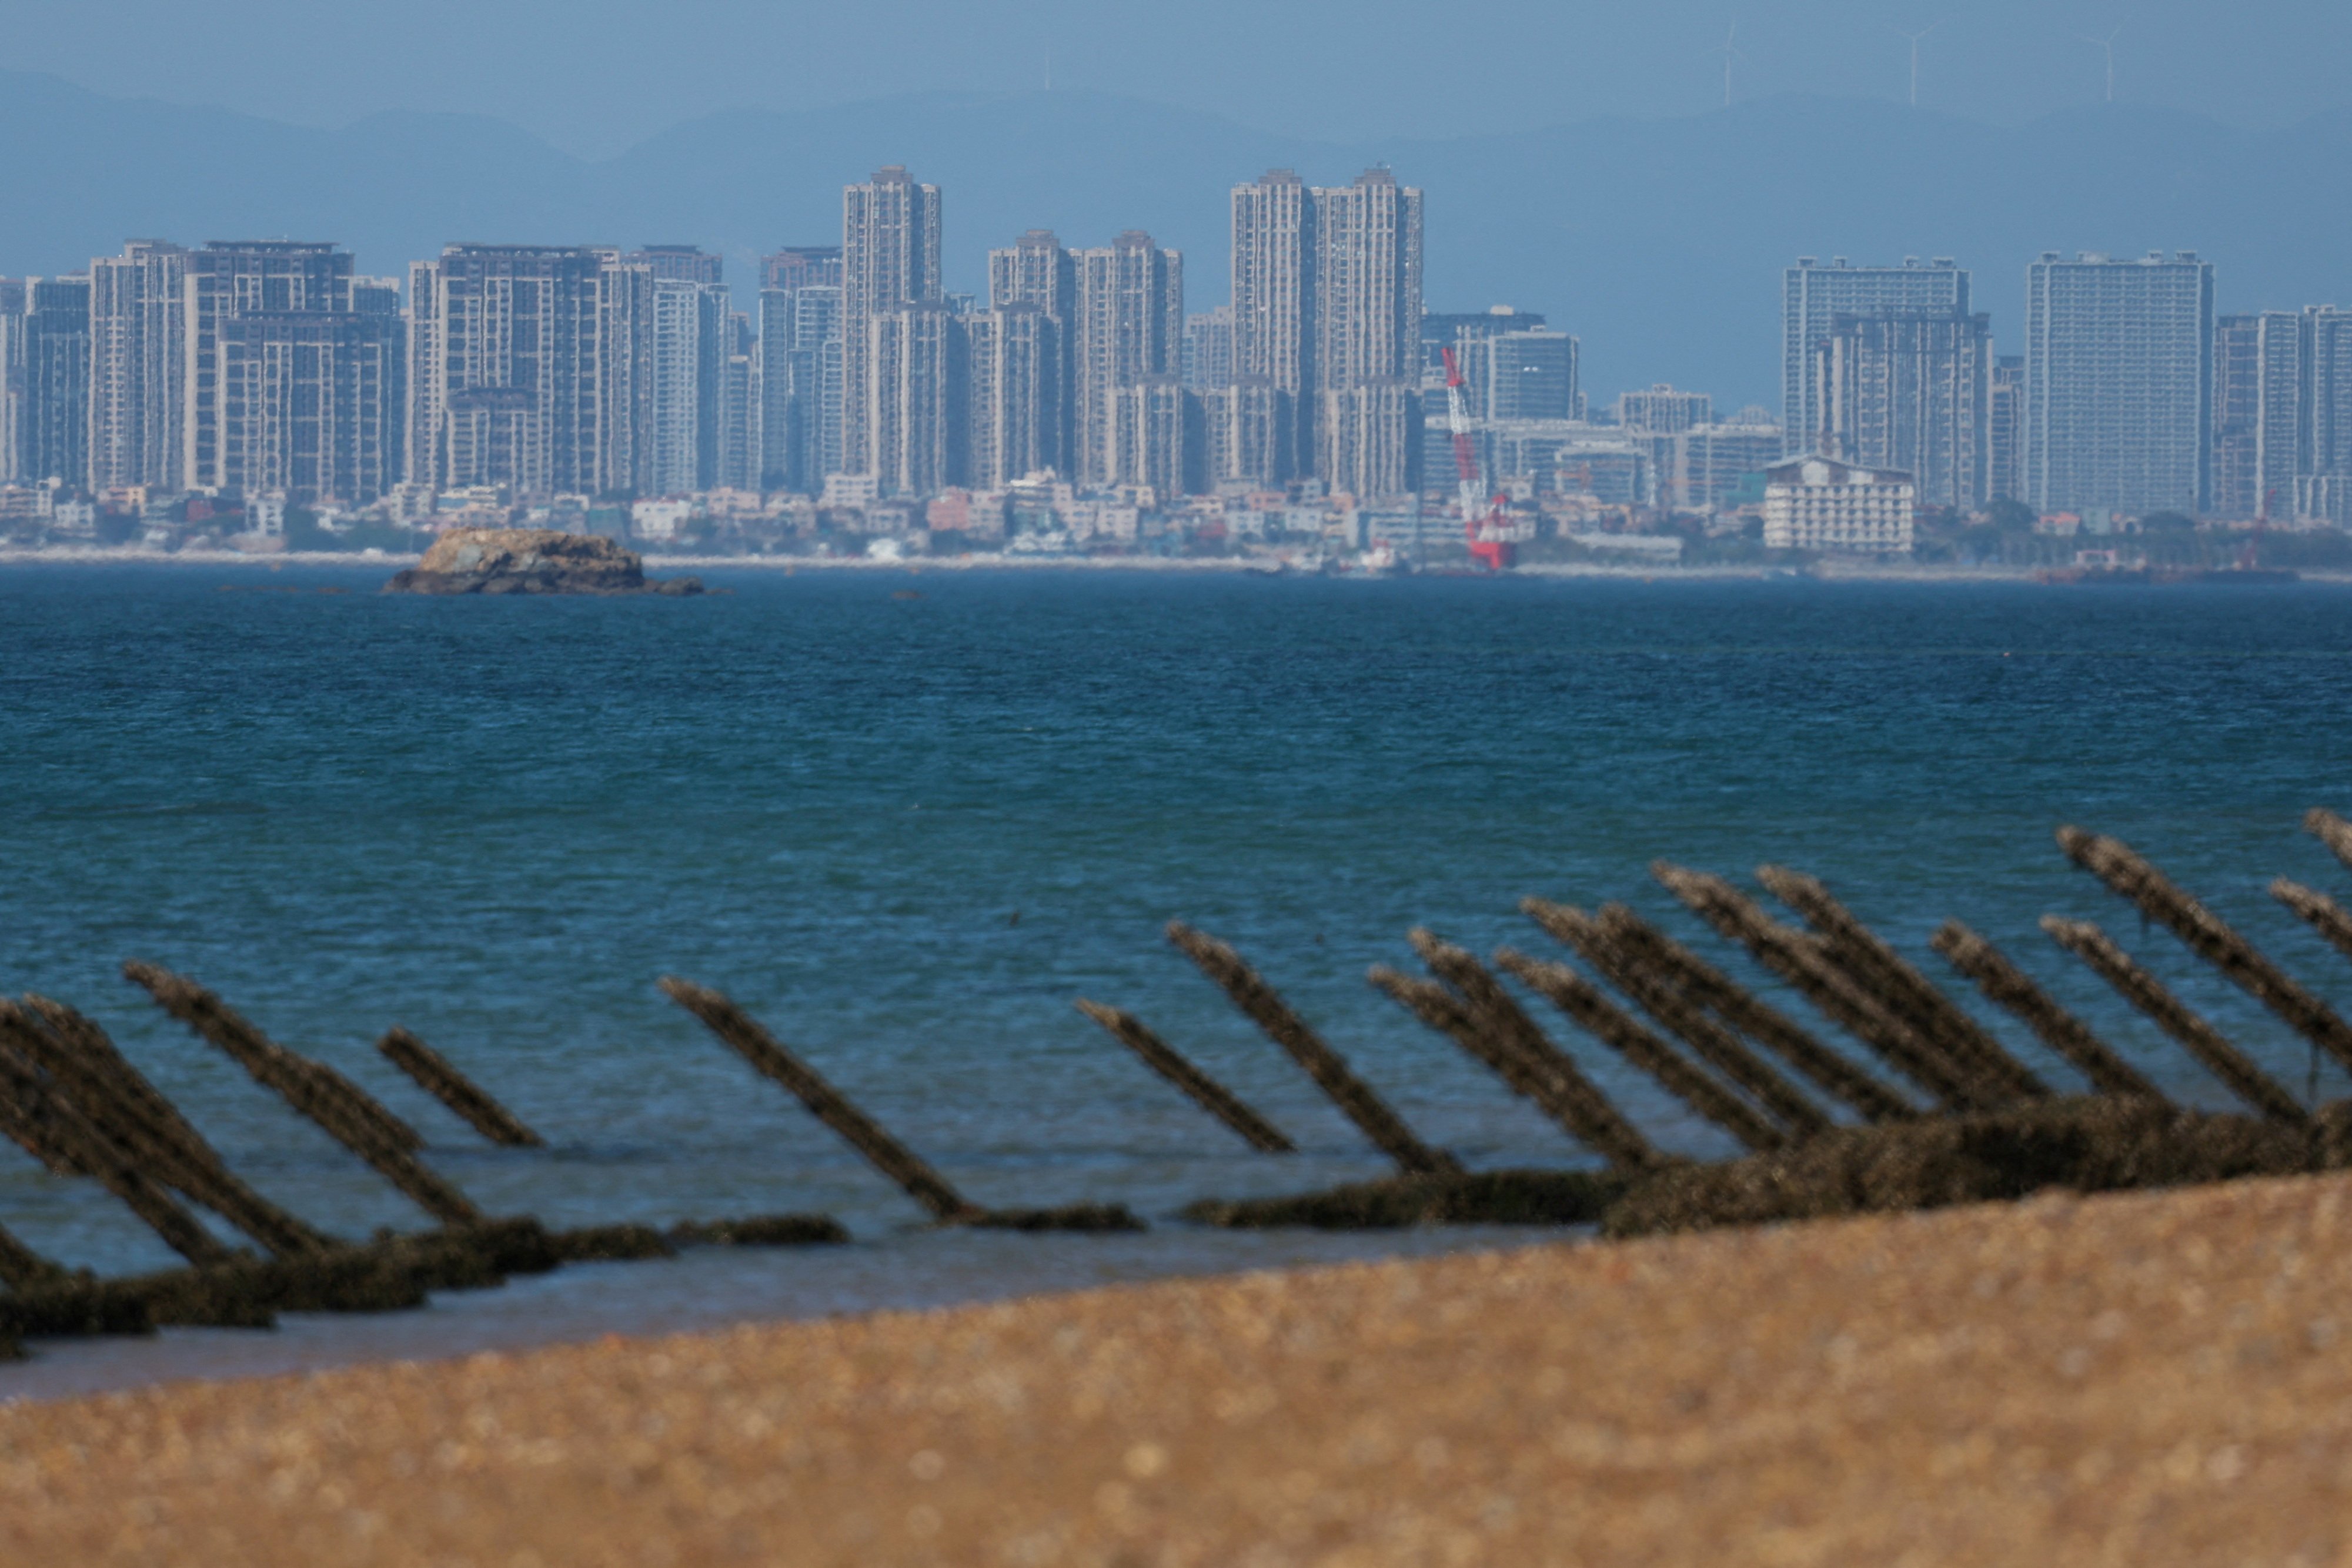 Anti-landing barricades are pictured on the beach at Quemoy, with the mainland Chinese city of Xiamen in the background. Photo: Reuters